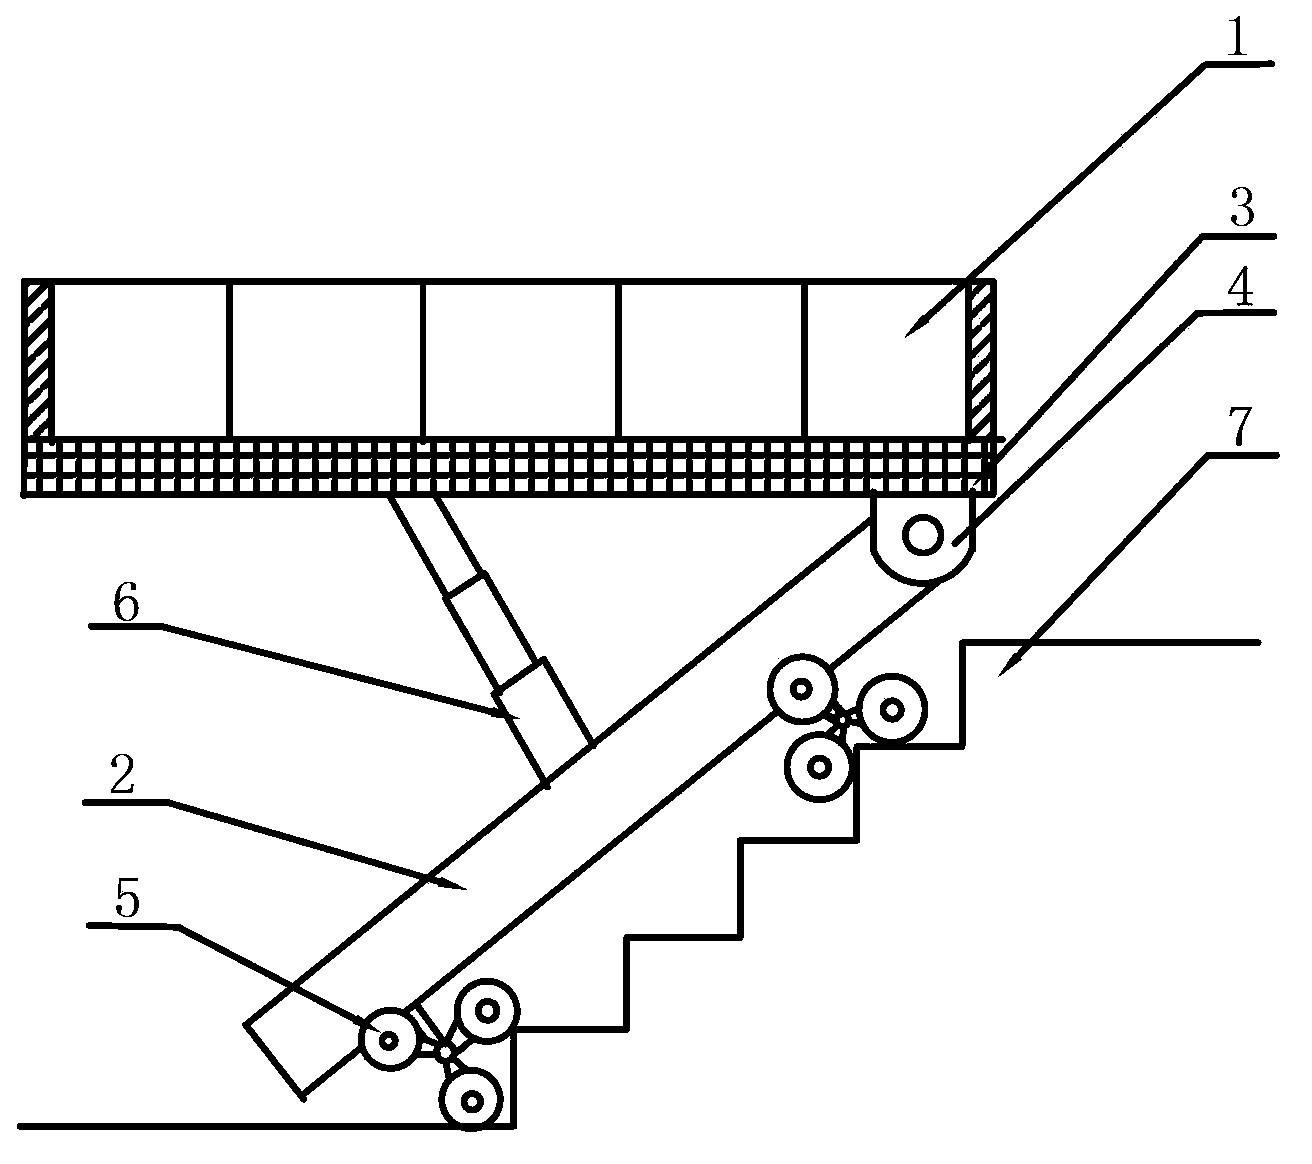 Stairs-climbing trolley